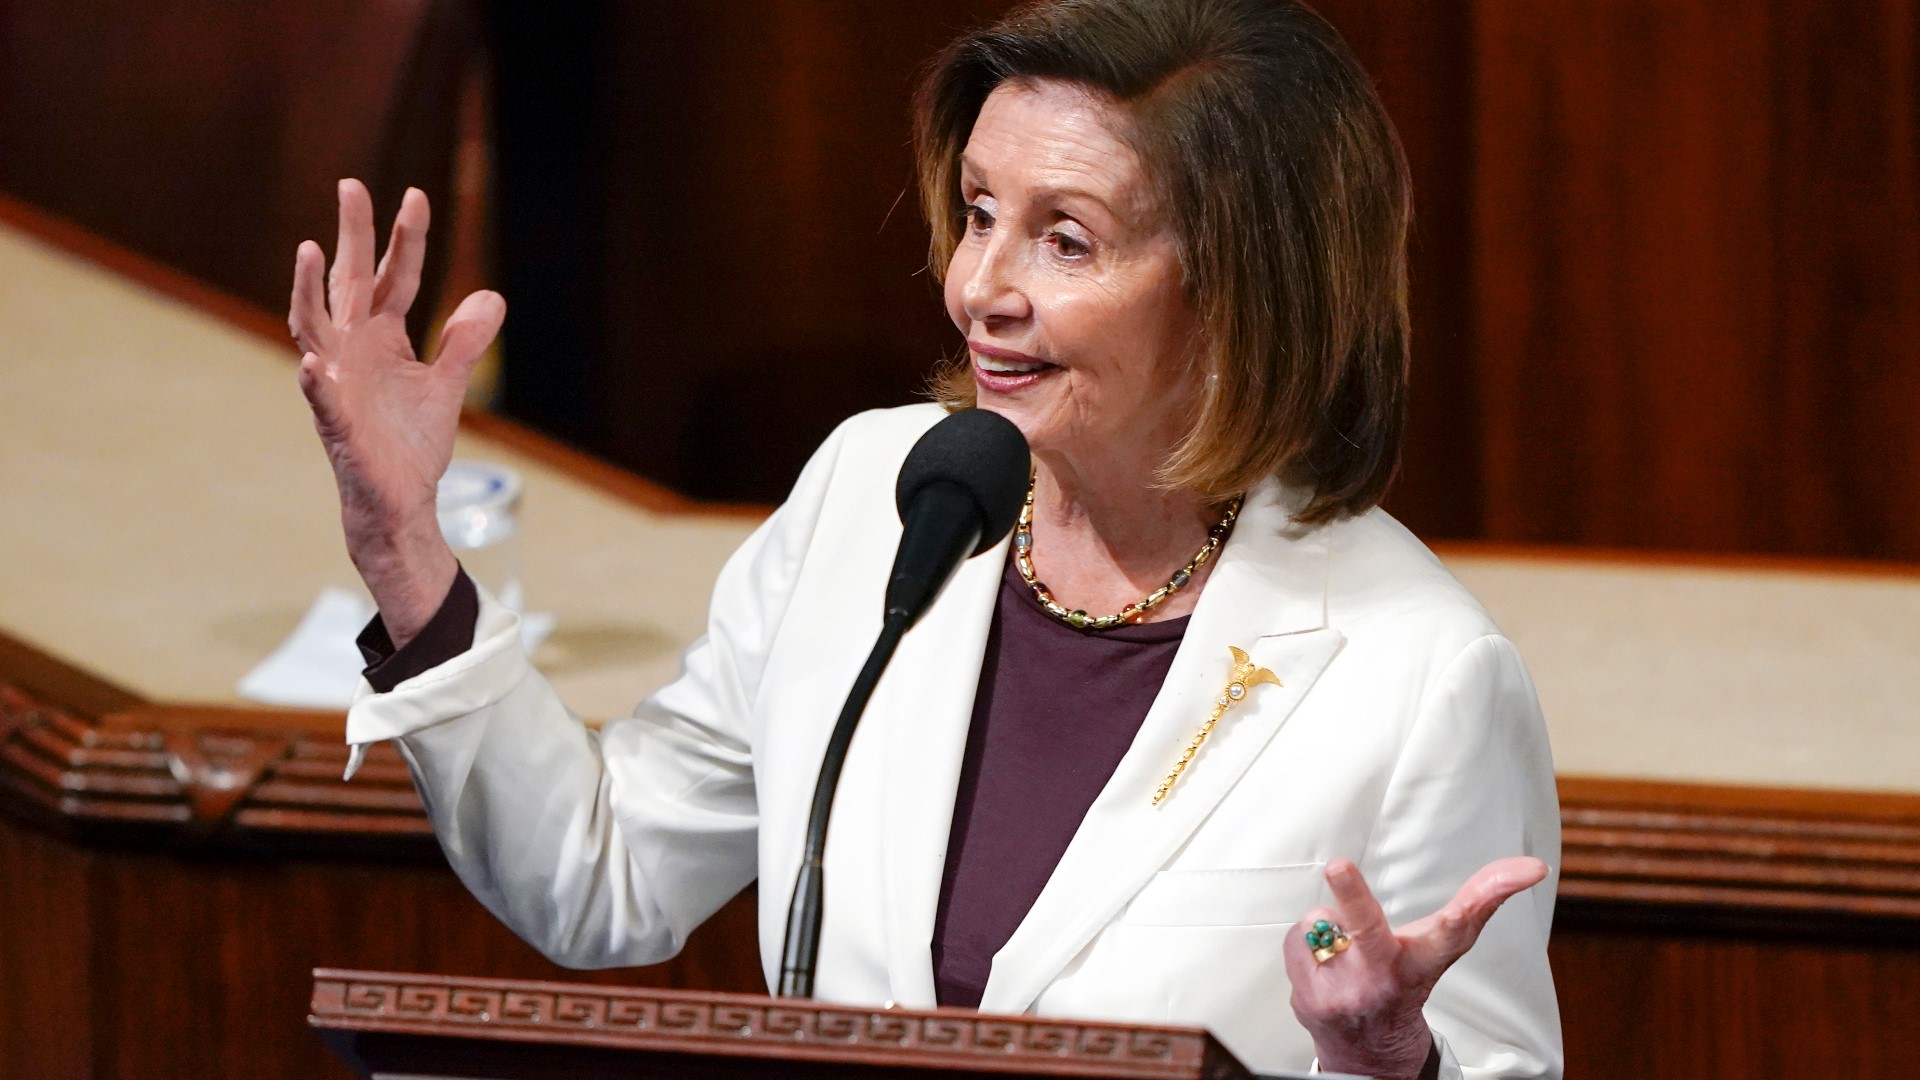 "For me, the hour has come for a new generation to lead the Democratic caucus that I so deeply respect,” Pelosi said in her speech on the House floor.